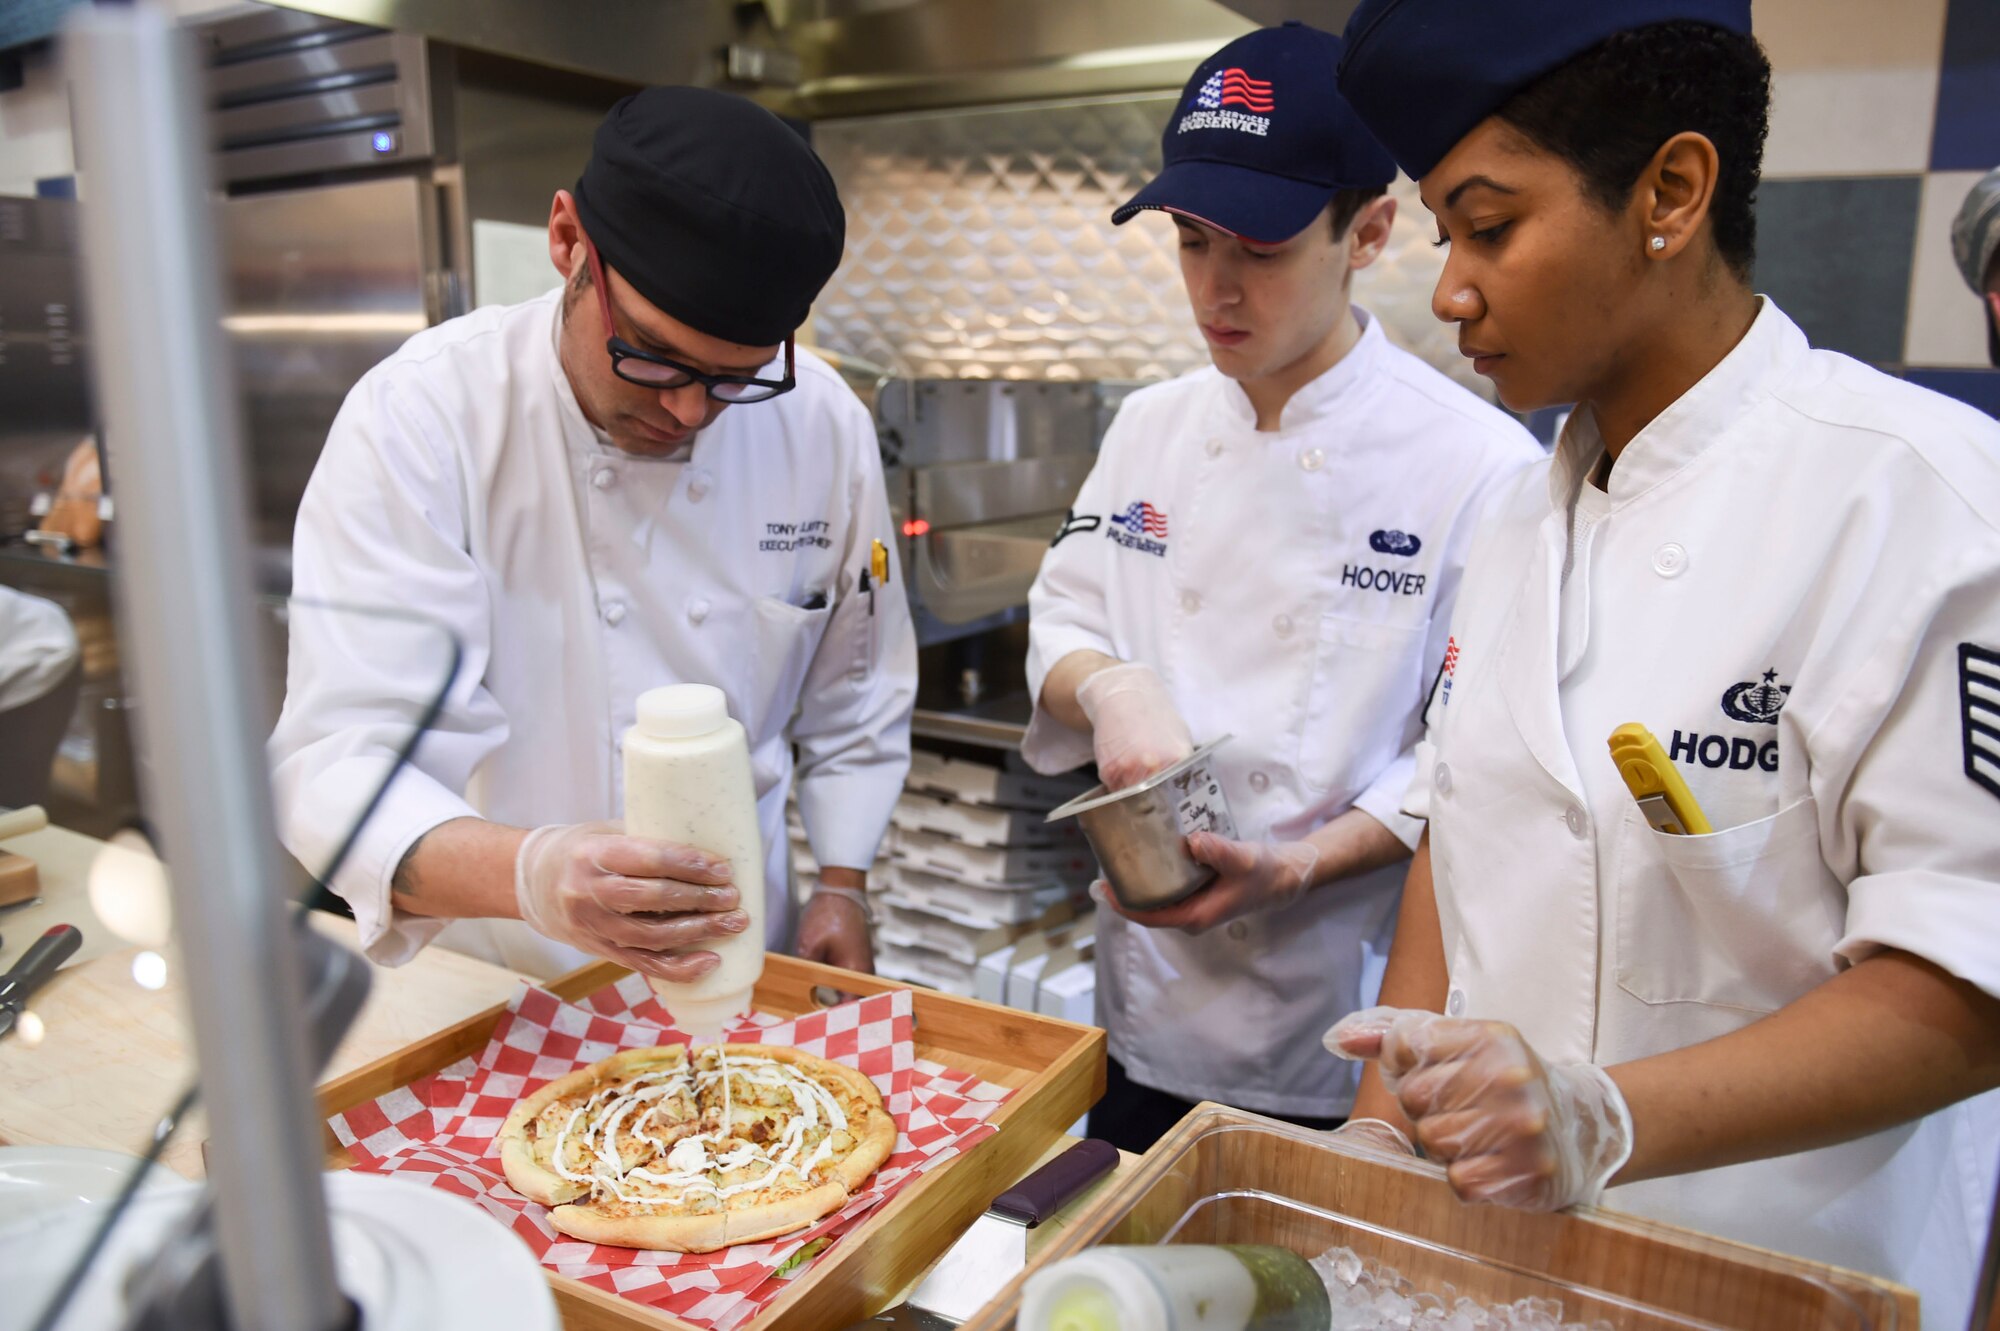 U.S. Air Force 19th Force Support Squadron dining facility Airmen and an Aramark chef prepare a personal-style pizza for sampling during the grand re-opening ceremony Jan. 23, 2017, at Little Rock Air Force Base, Ark. The pizza zone now offers made-to-order personal pan pizzas. (U.S. Air Force photo by Staff Sgt. Kaylee Clark)